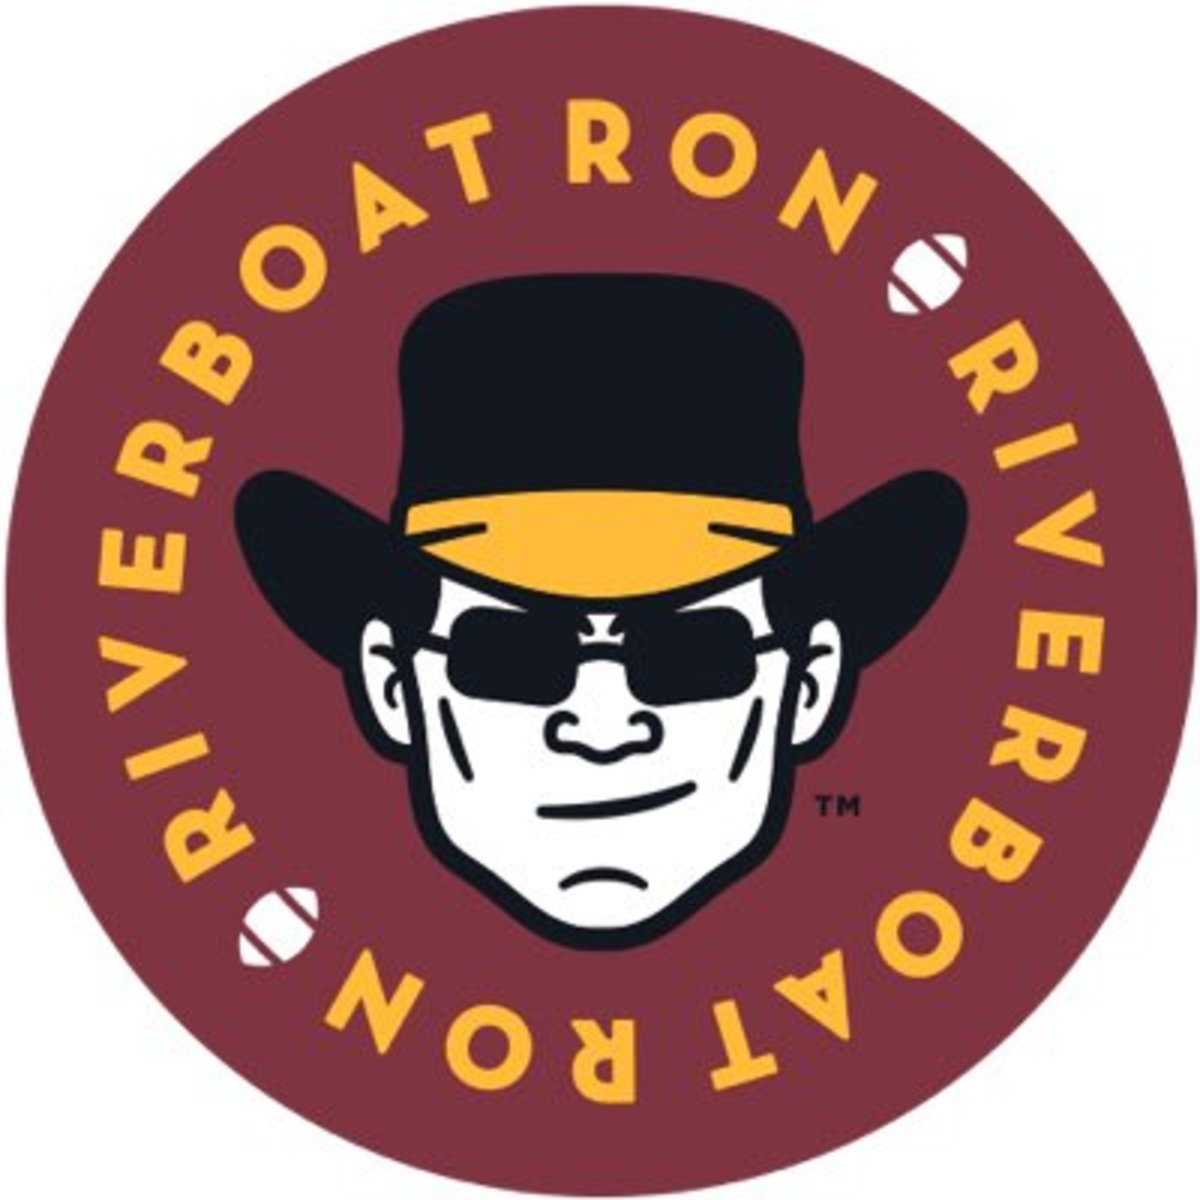 riverboat ron meaning